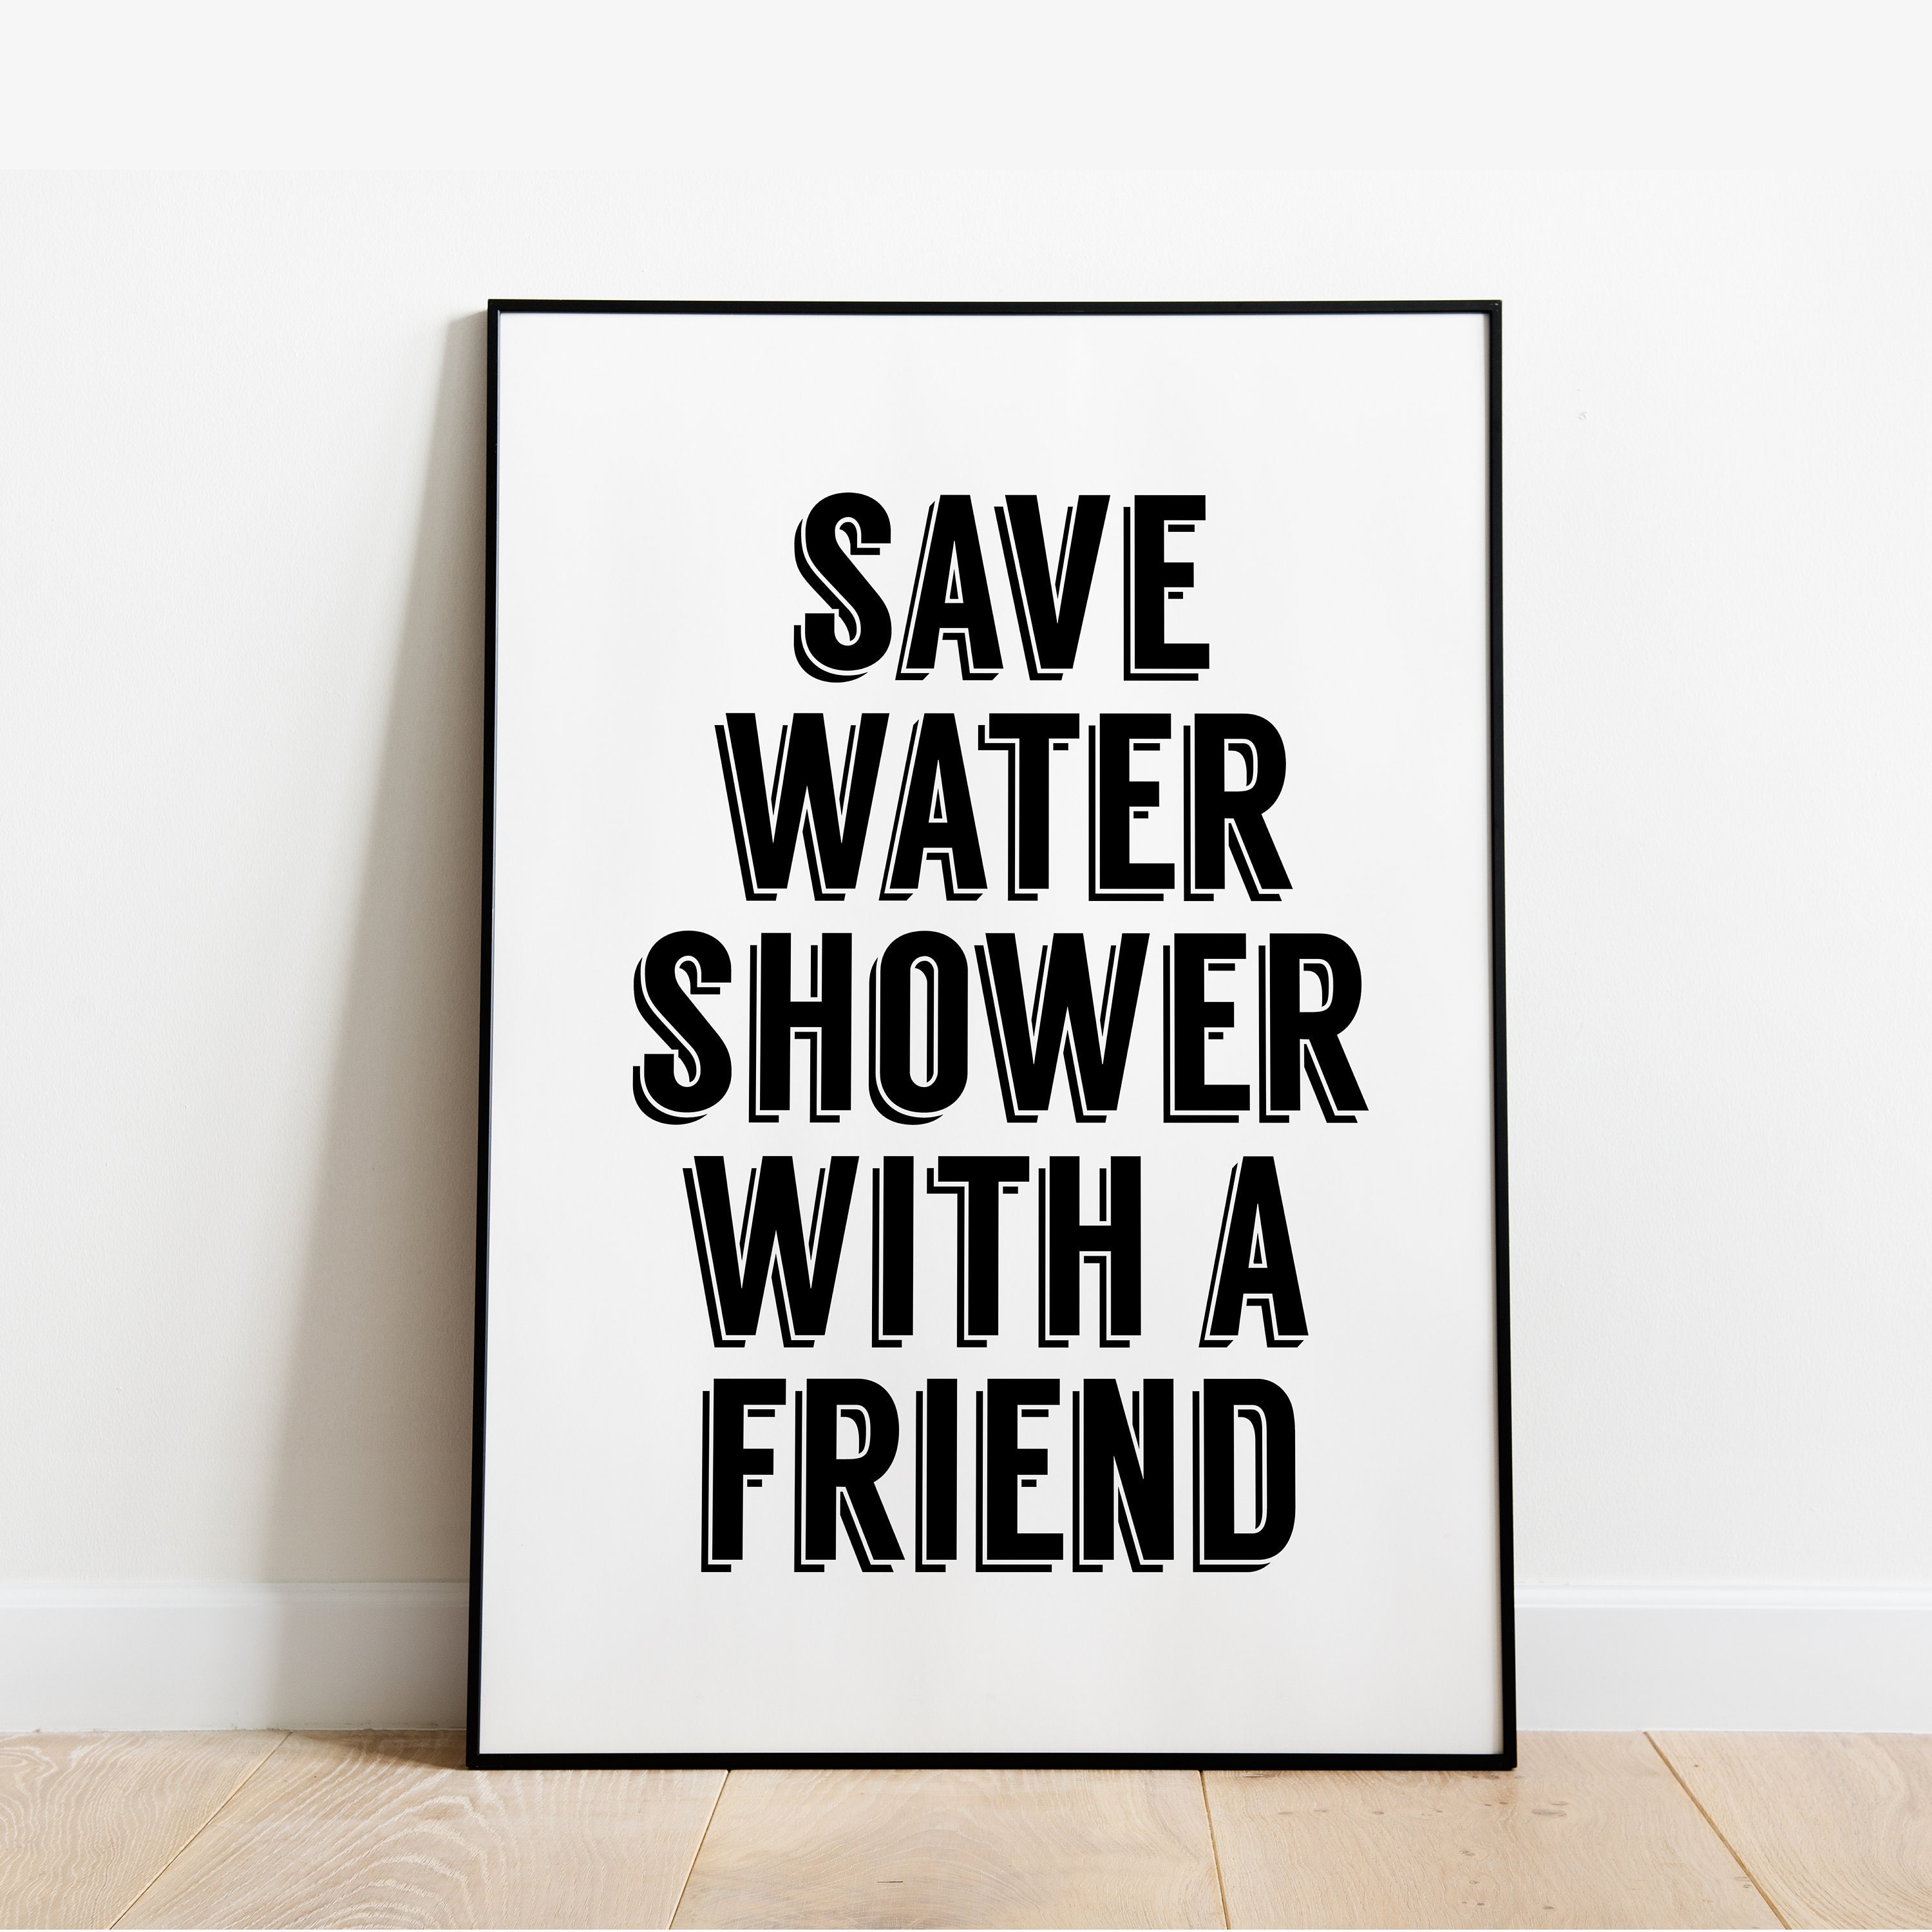 Save Water Shower Together Bathroom Typography Black Poster Print Home Wall Art 